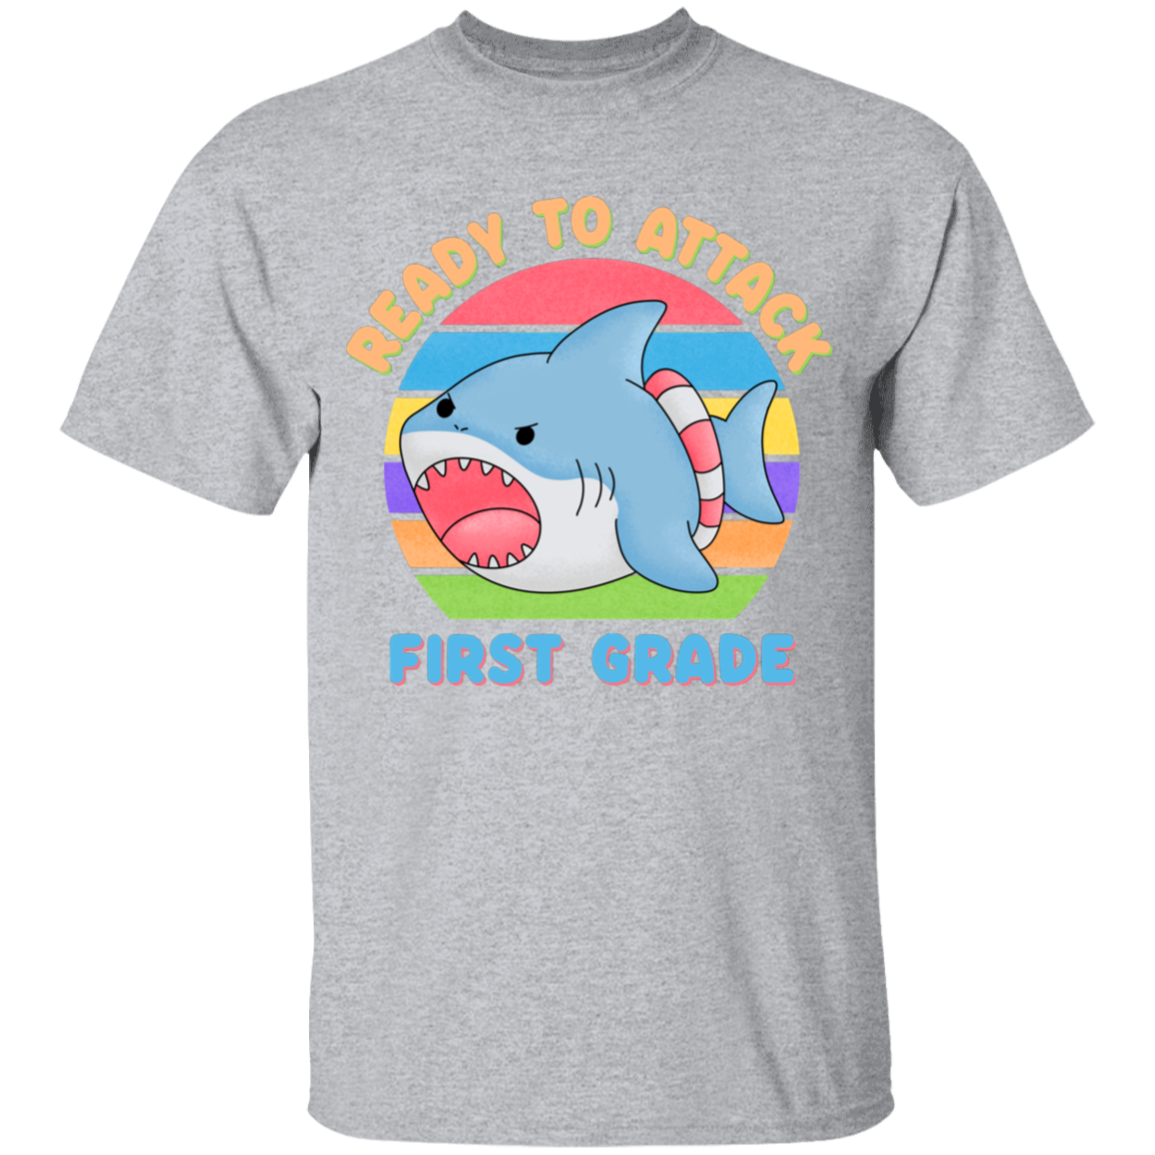 Ready to Attack Shark First Grade Youth Cotton T-Shirt